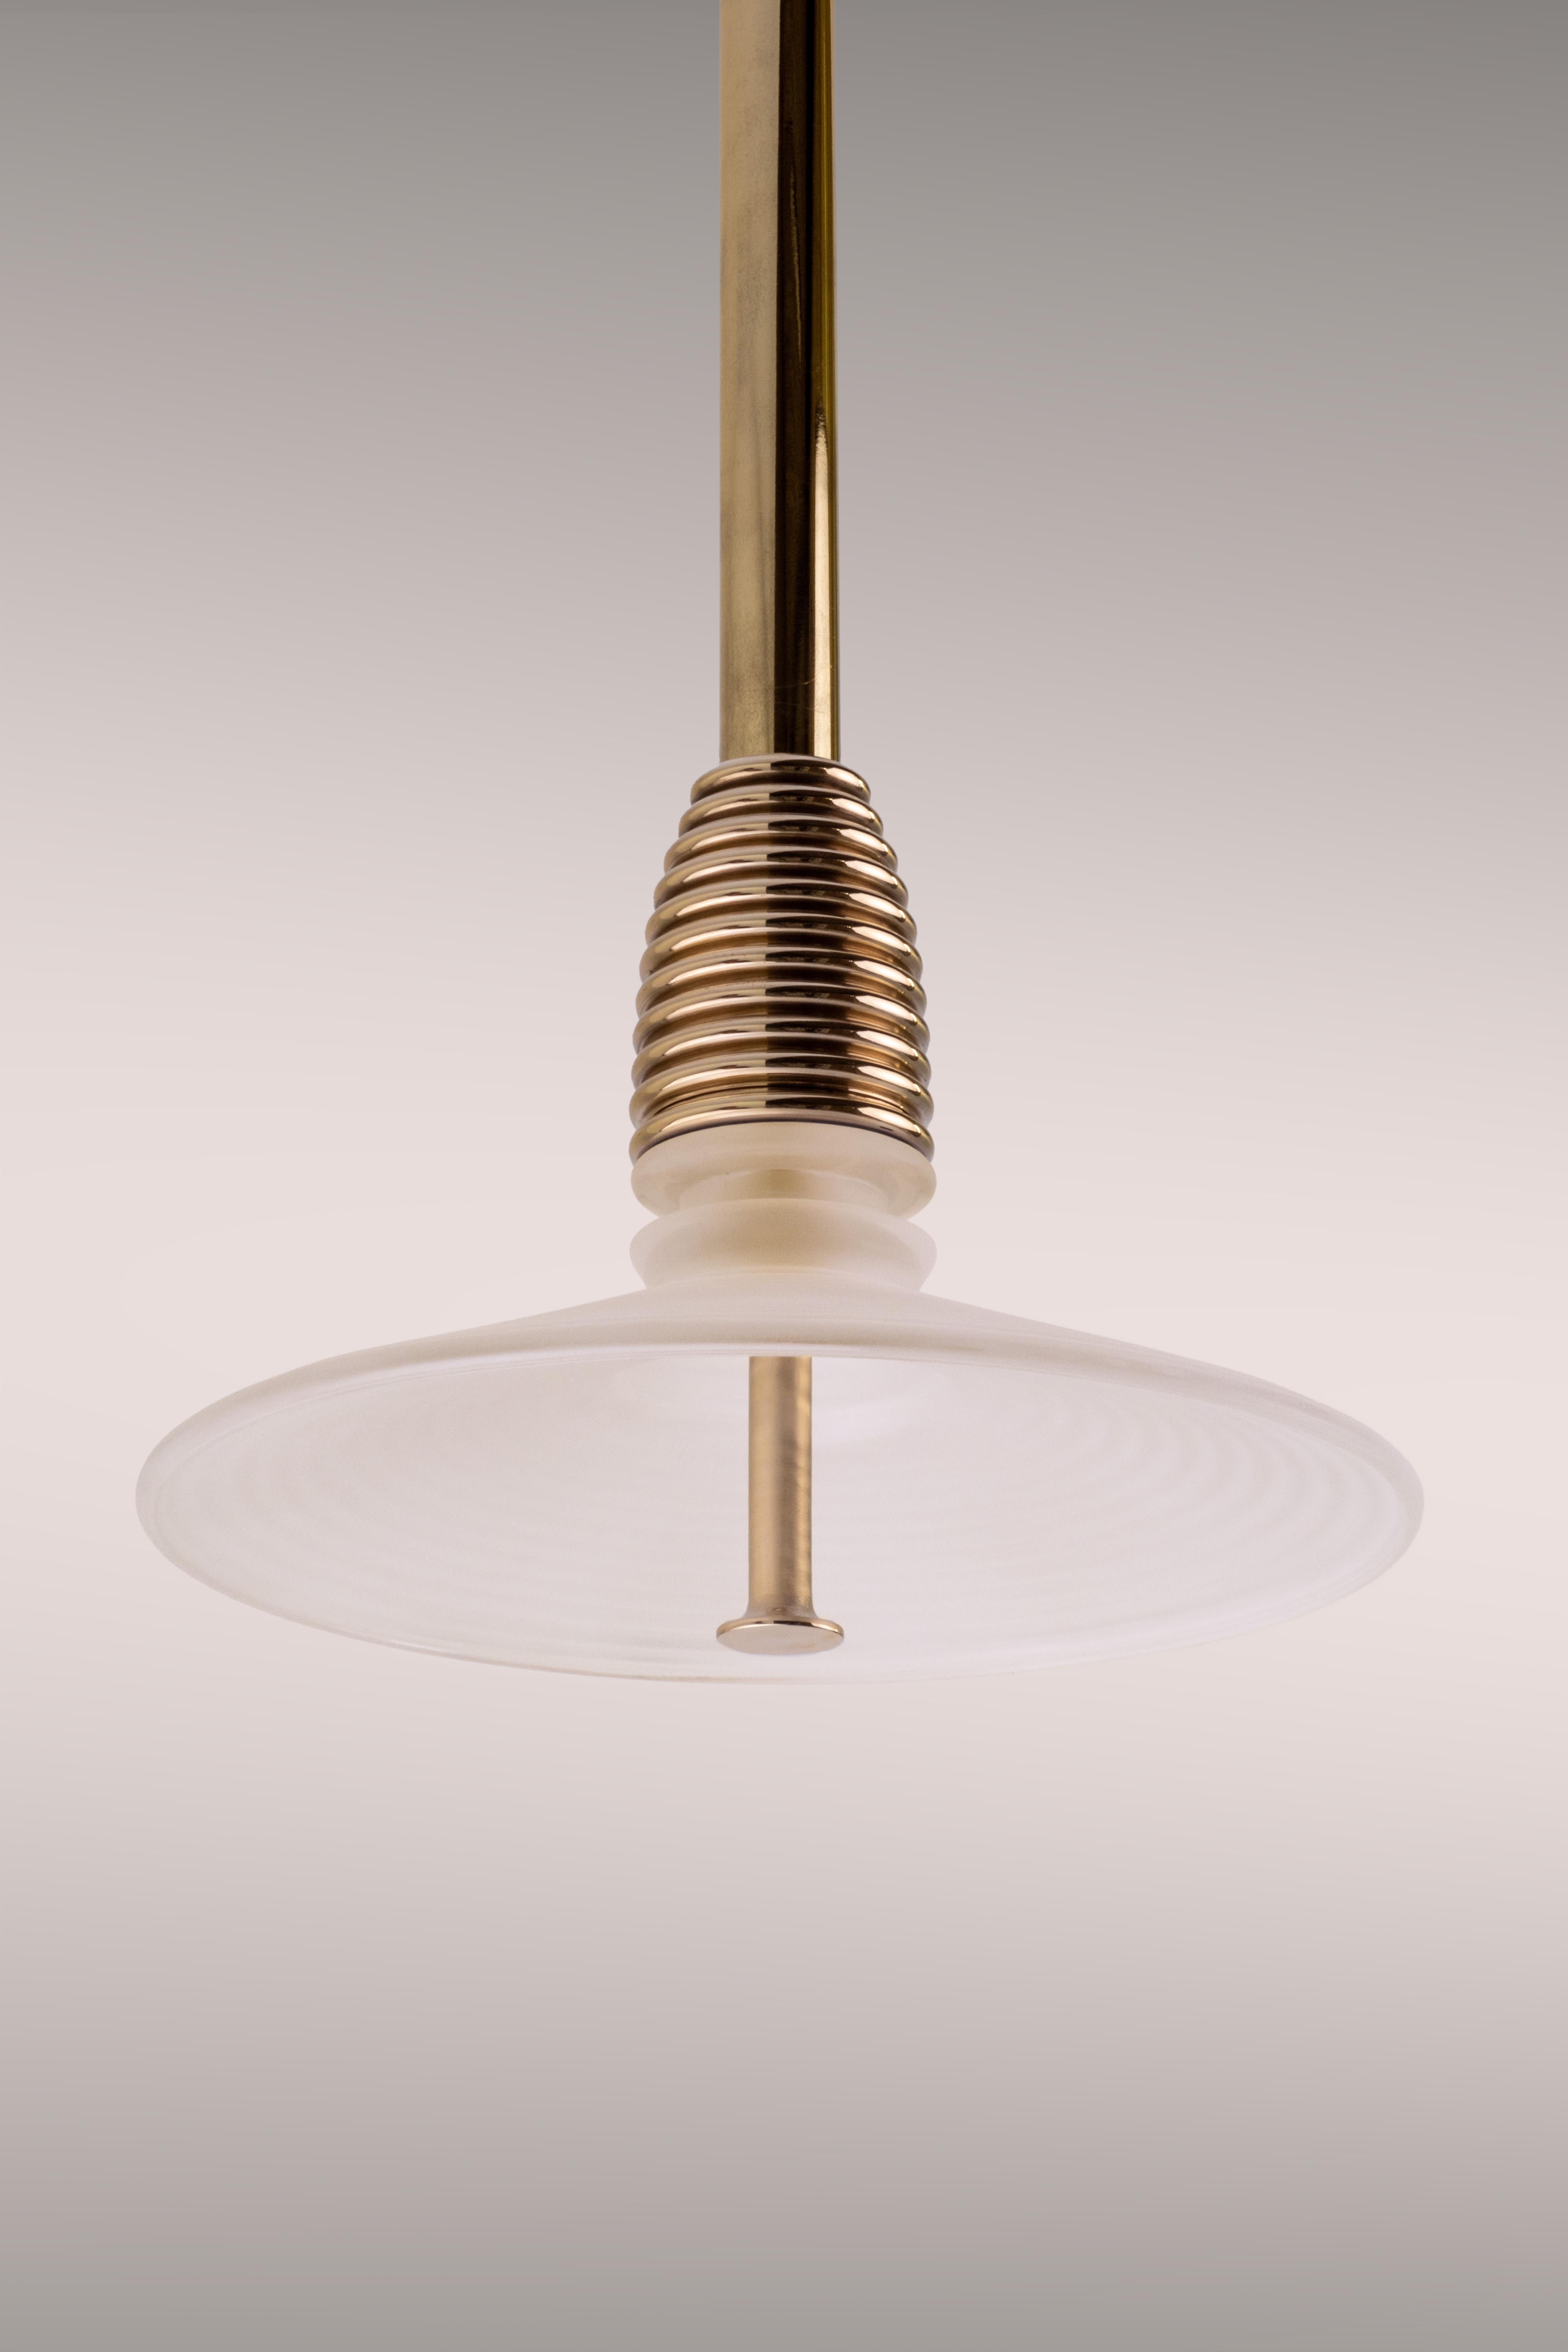 The Insulator 'B' Pendant in dark brass and clear glass by NOVOCASTRIAN deco In New Condition For Sale In Washington, GB